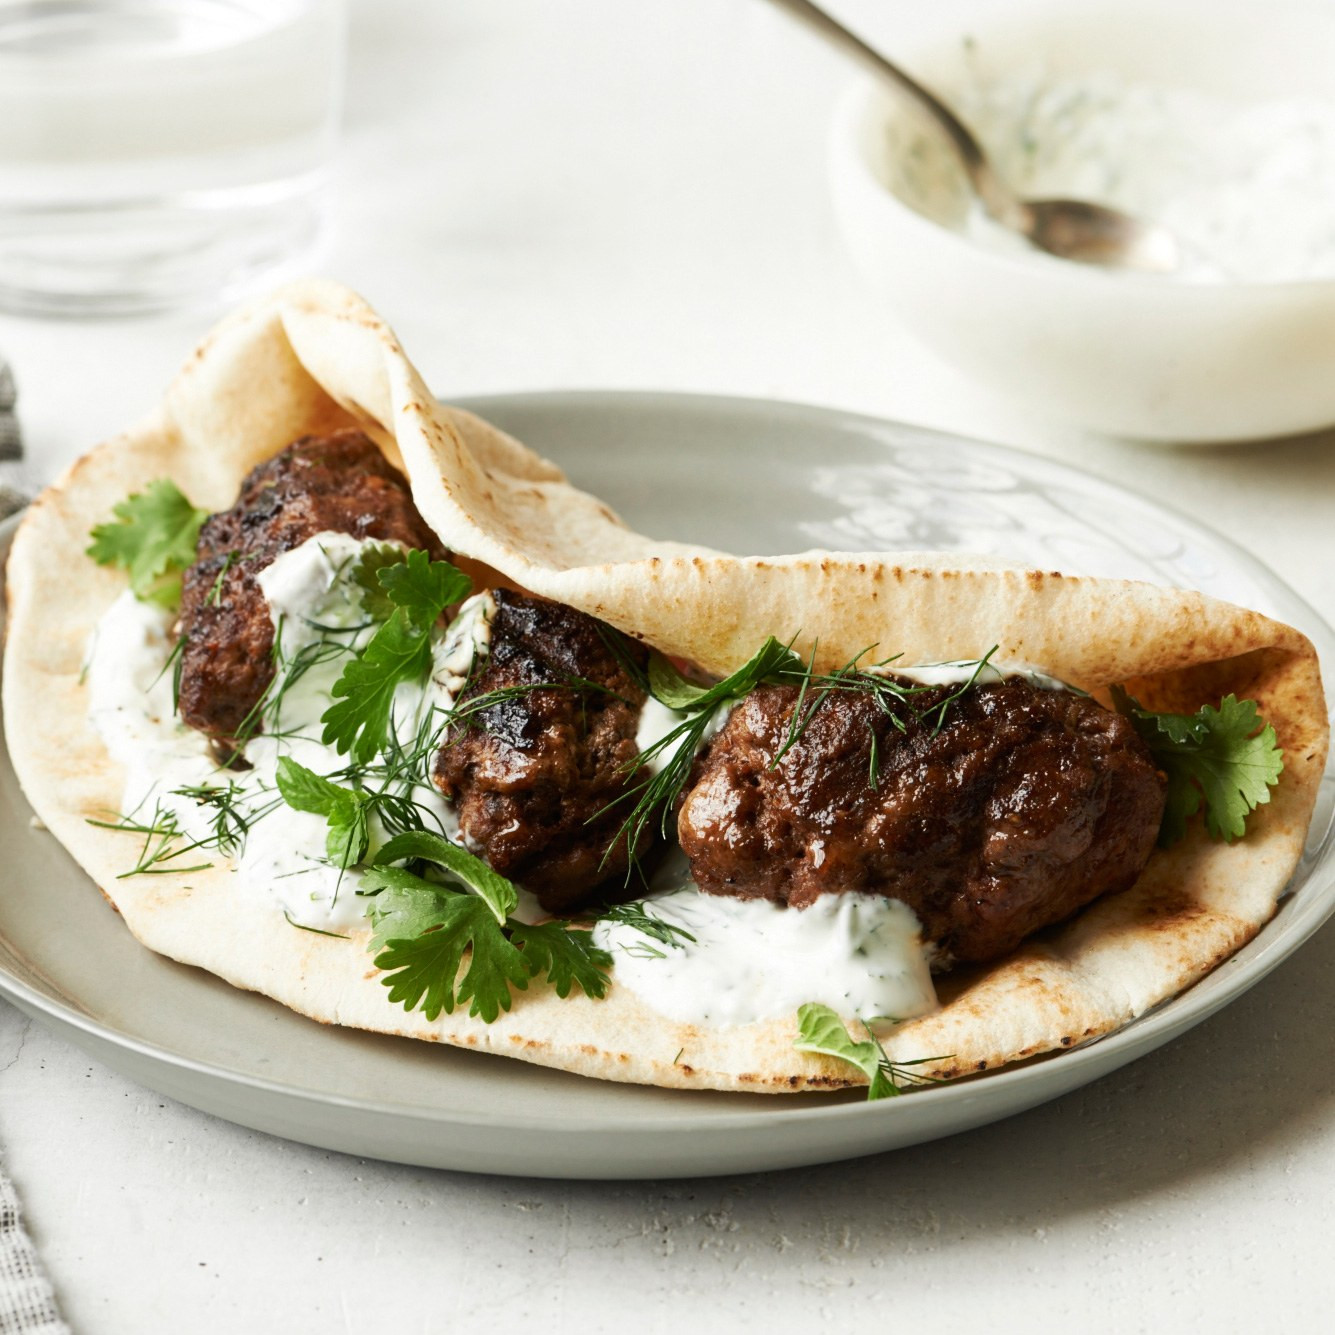 Middle Eastern Ground Lamb Recipes
 Spiced Middle Eastern Lamb Patties with Pita and Yogurt